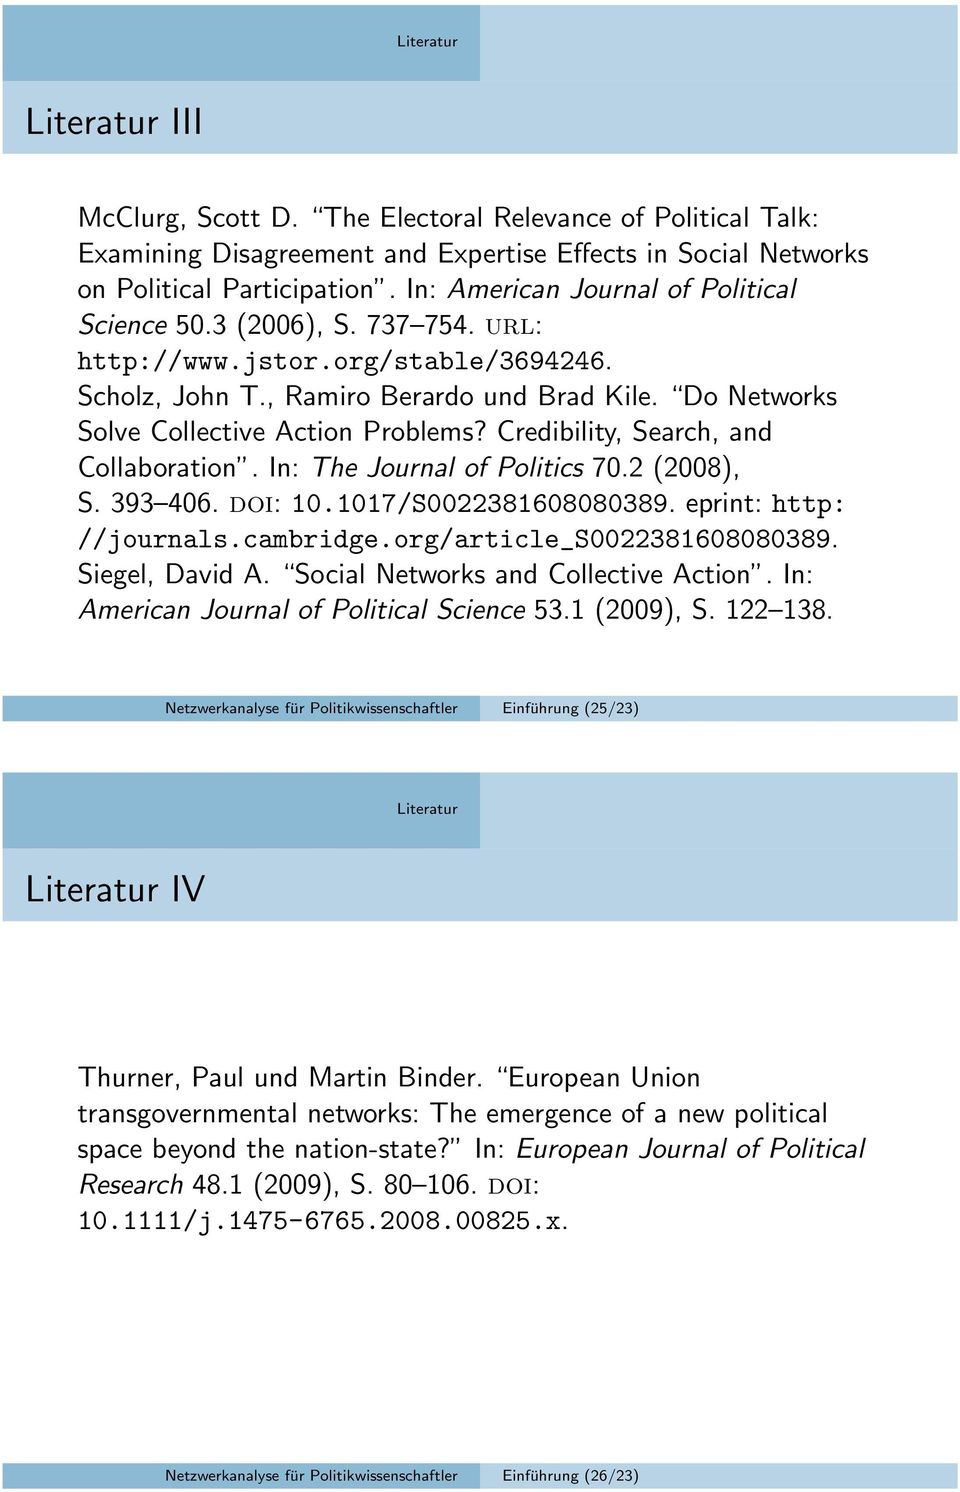 Do Networks Solve Collective Action Problems? Credibility, Search, and Collaboration. In: The Journal of Politics 70.2 (2008), S. 393 406. doi: 10.1017/S0022381608080389. eprint: http: //journals.